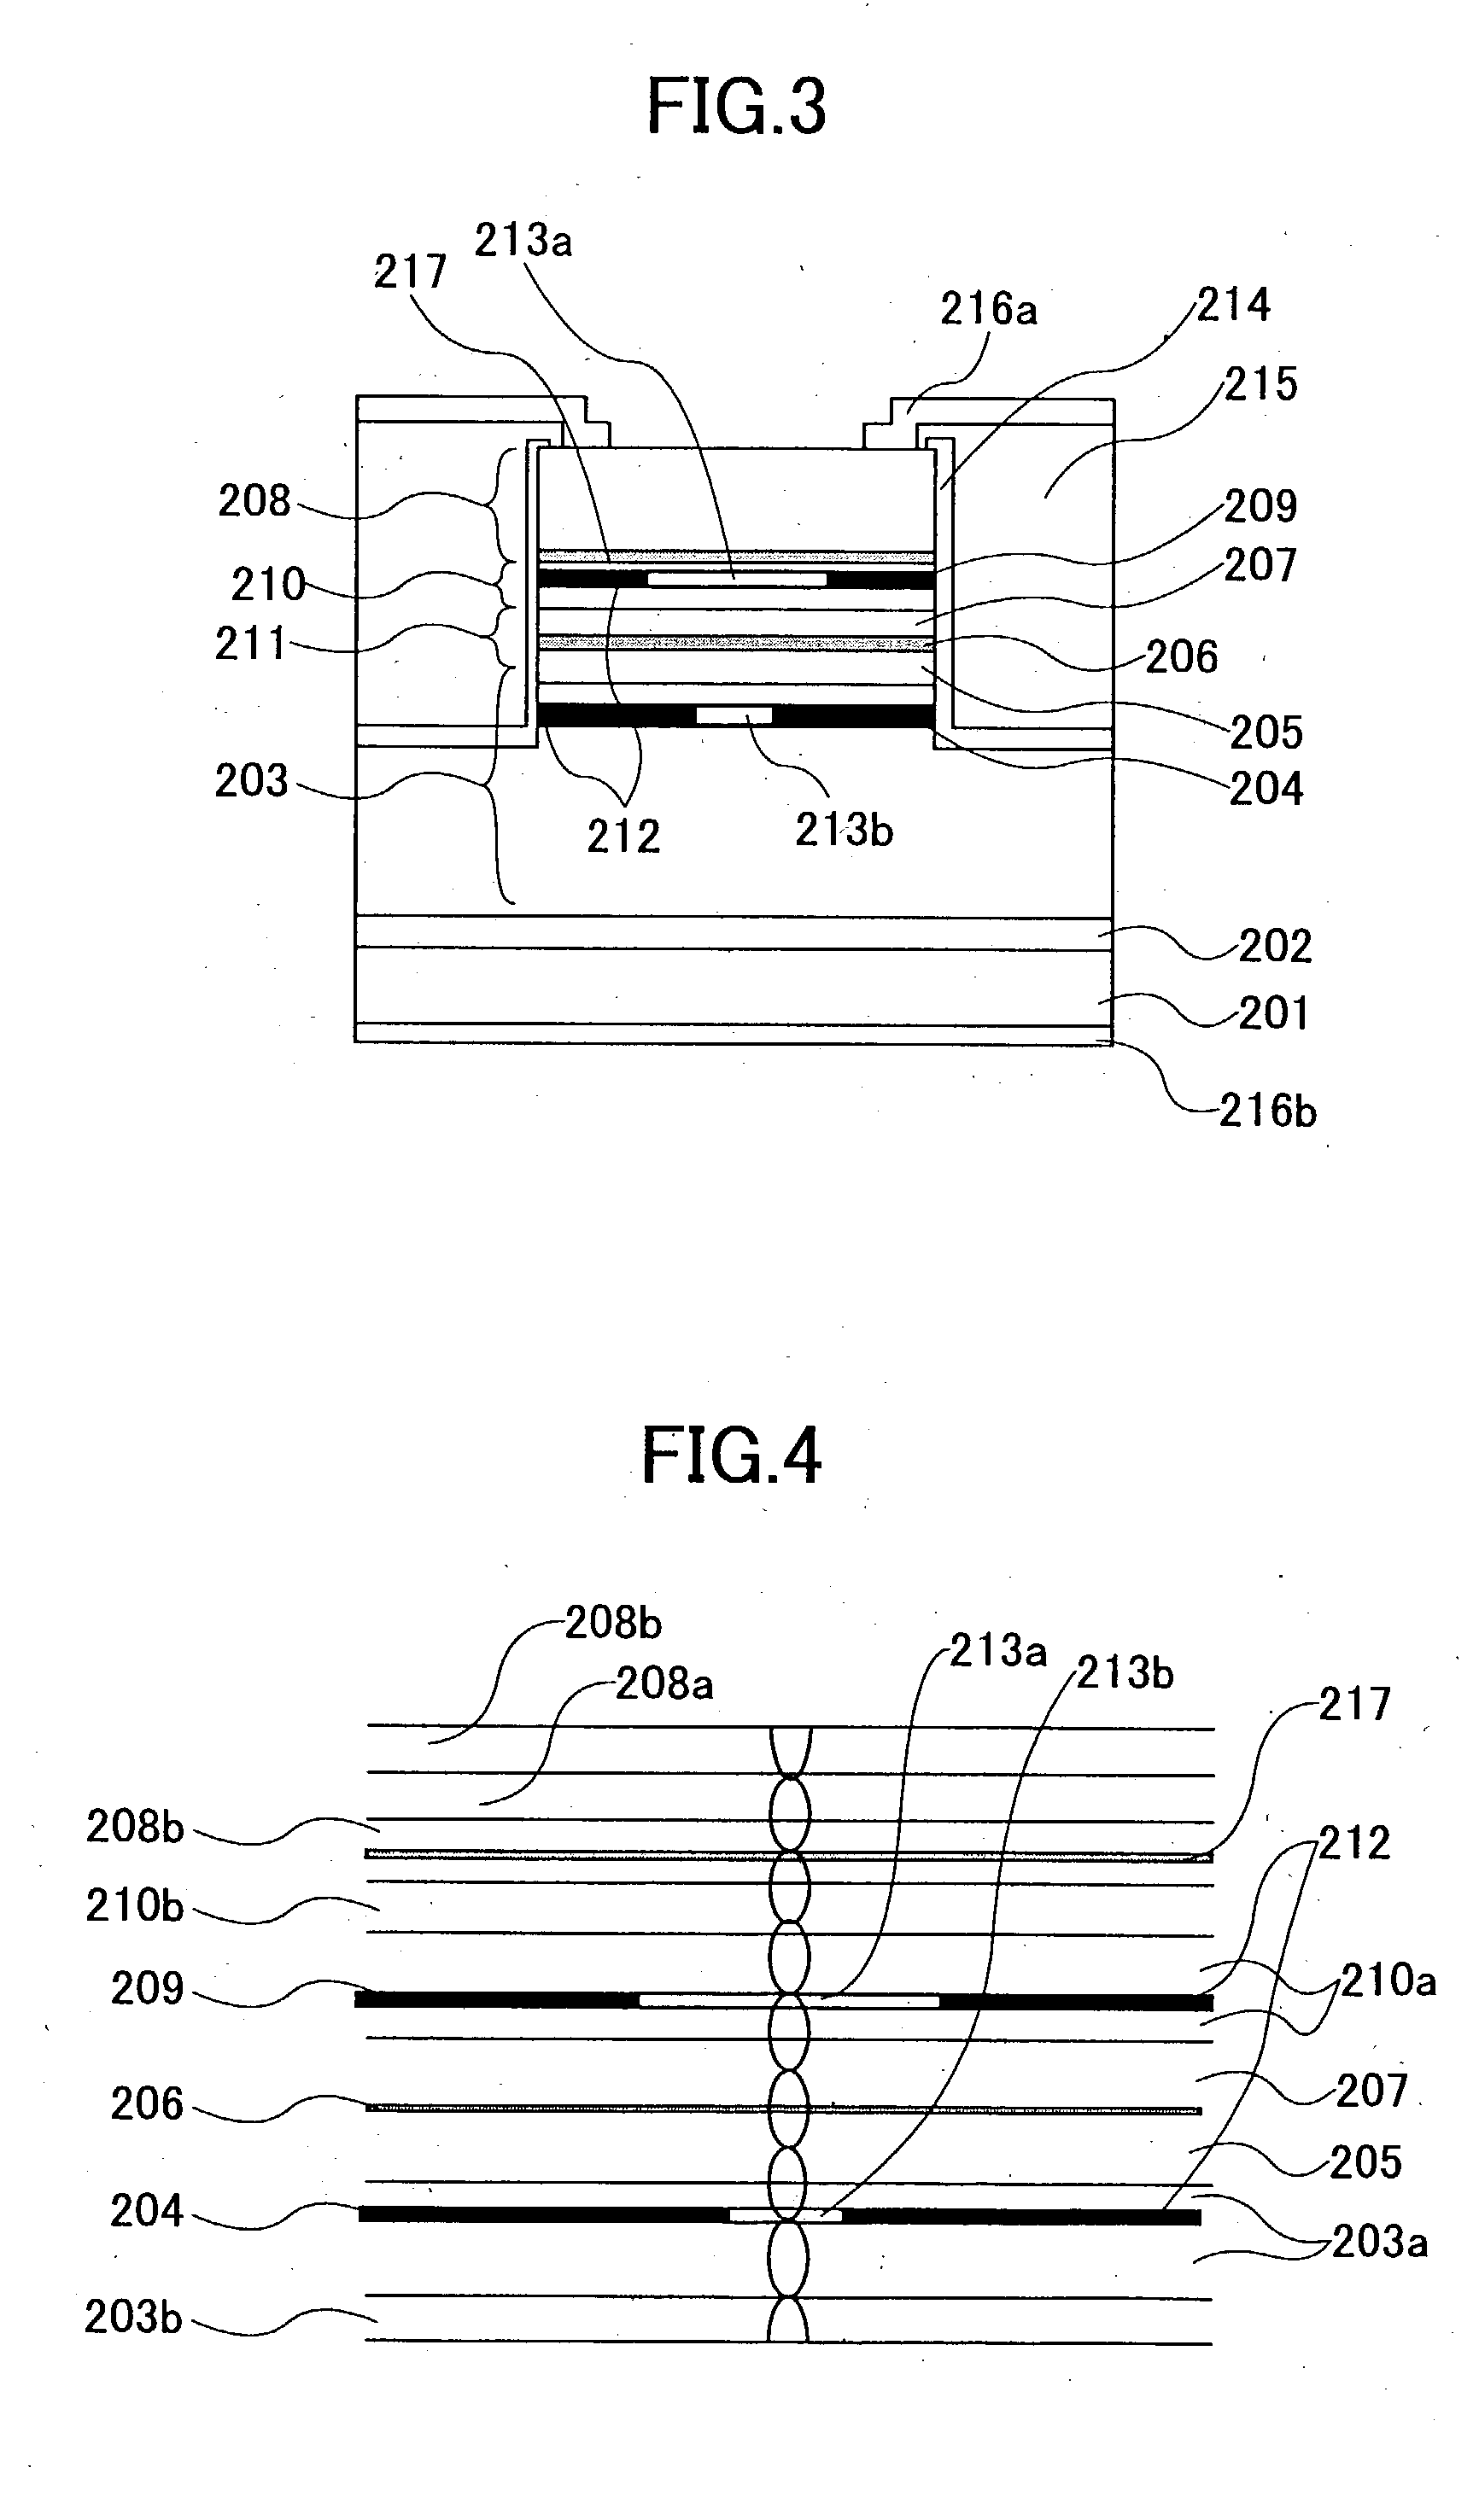 Surface-emitting laser diode having reduced device resistance and capable of performing high output operation, surface-emitting laser diode array, electrophotographic system, surface-emitting laser diode module, optical telecommunication system, optical interconnection system using the surface-emitting laser diode, and method of fabricating the surface-emitting laser diode